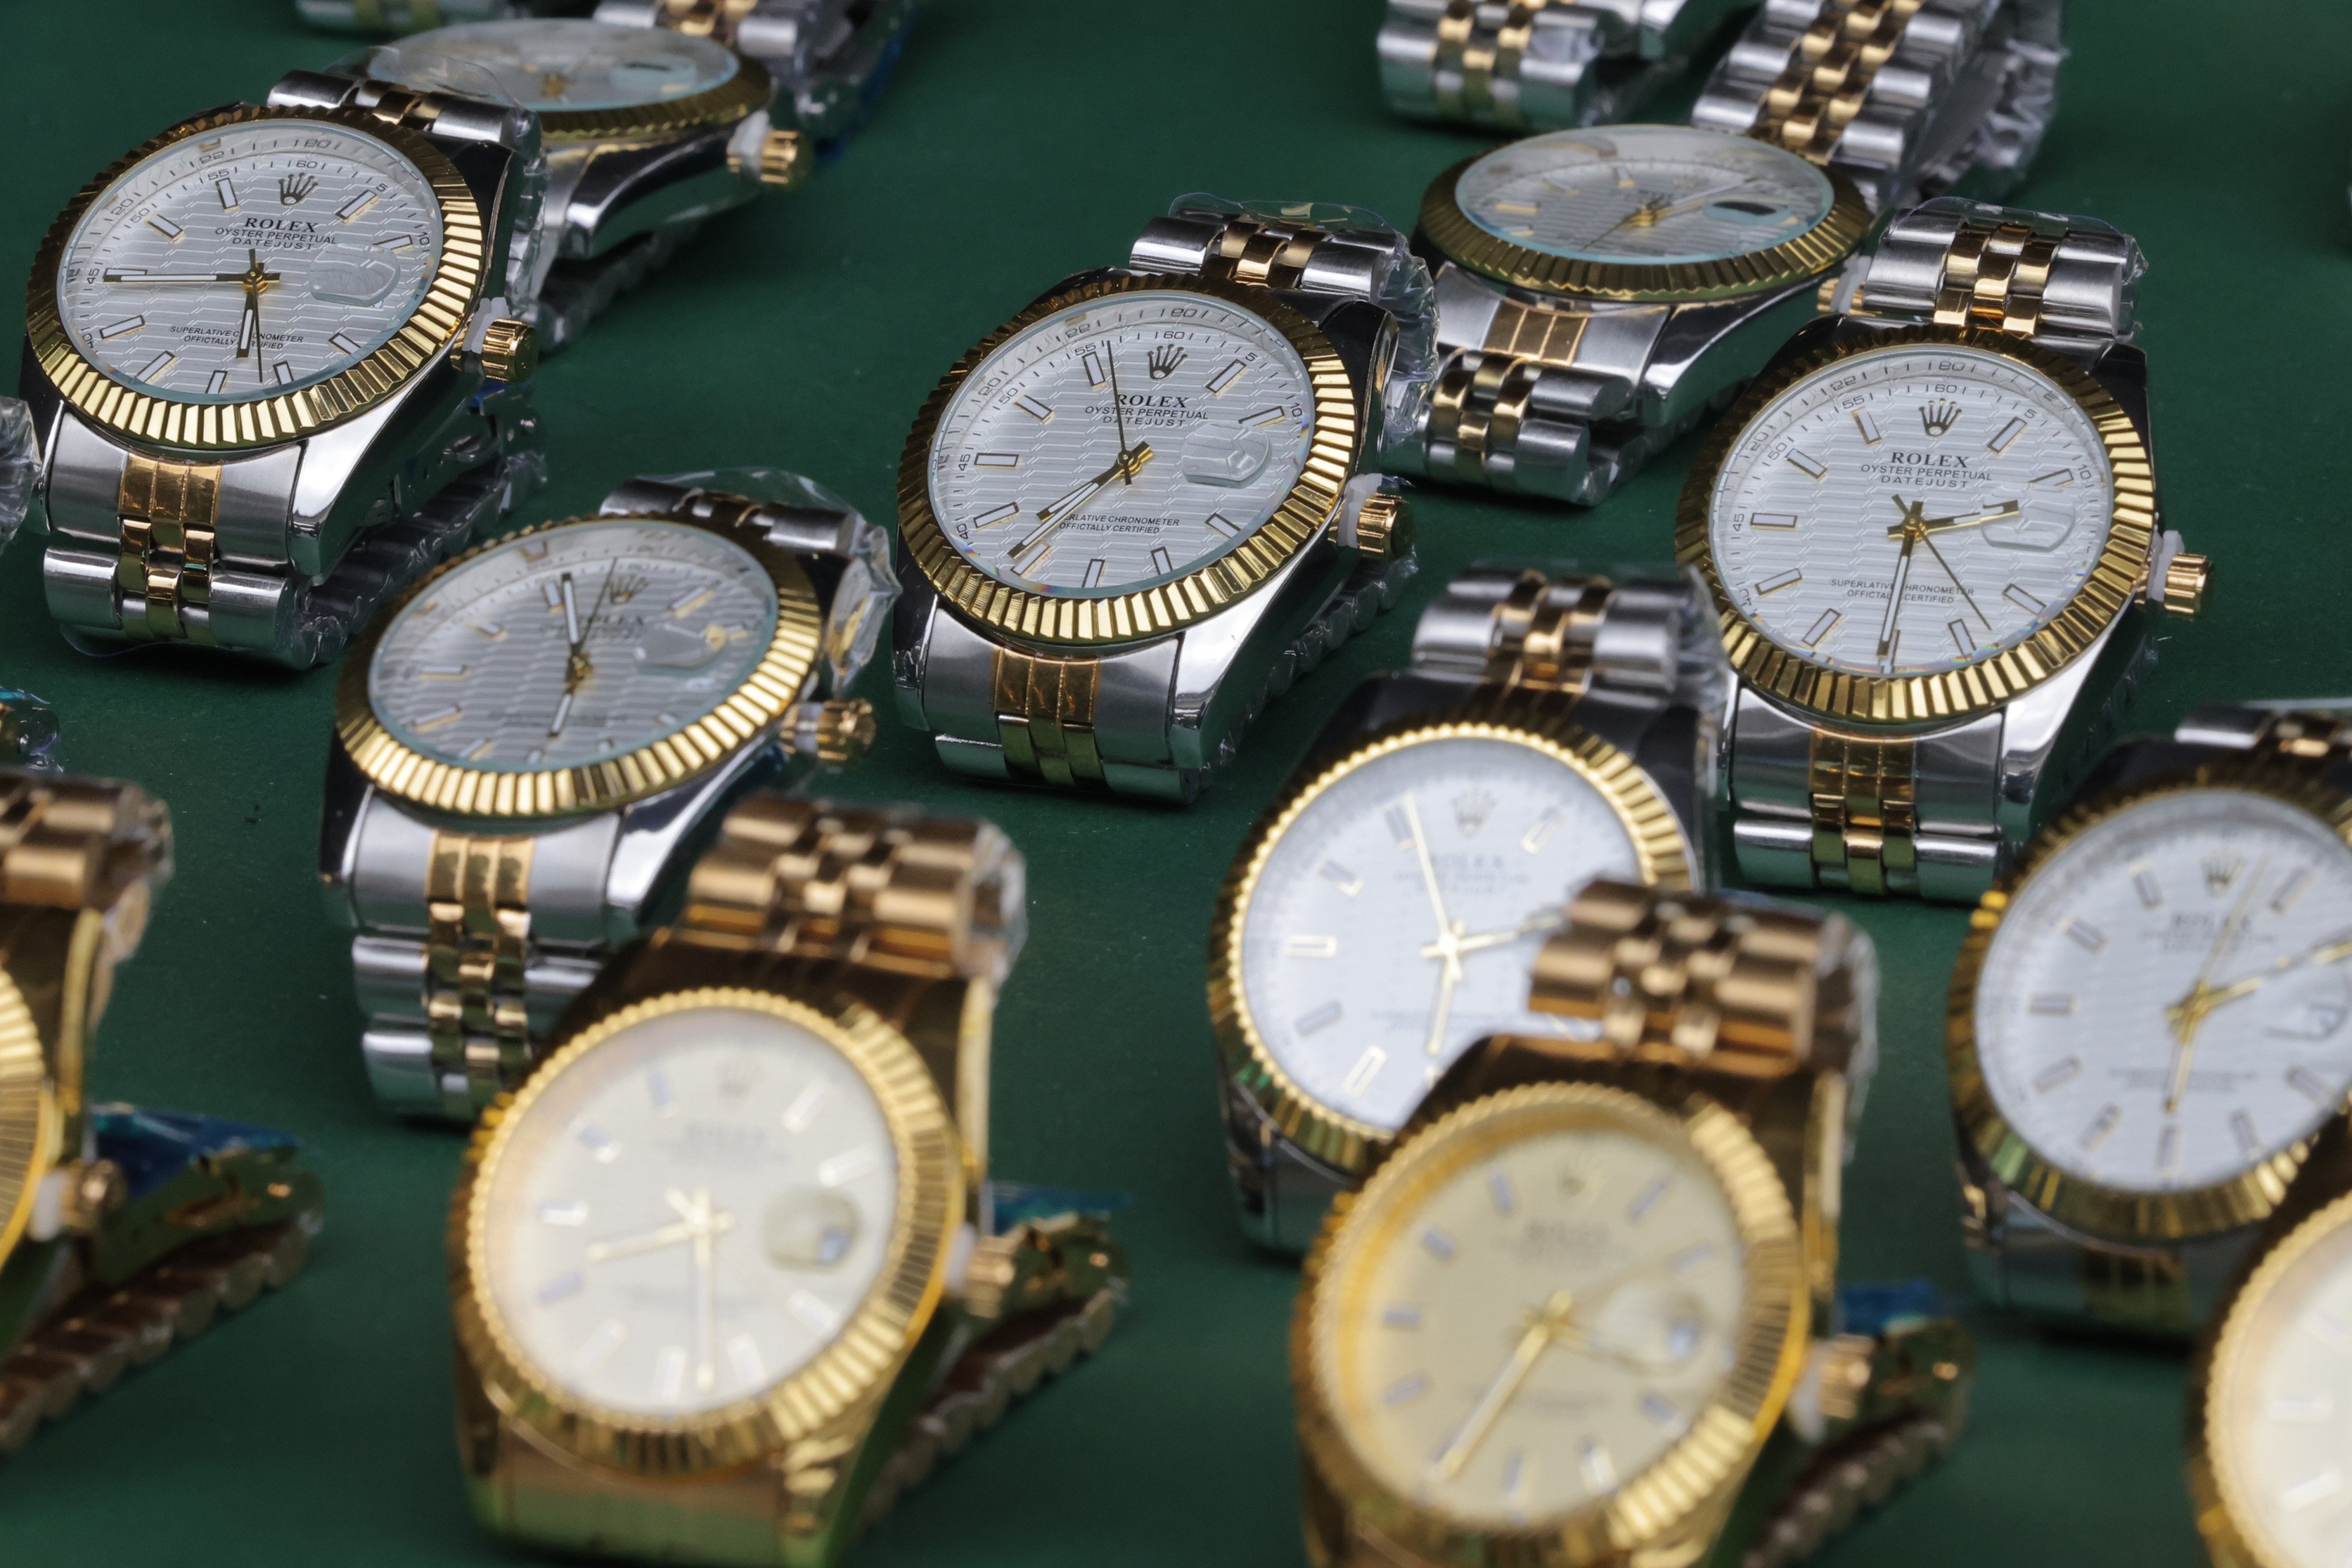 Could you spot a counterfeit Rolex? Even the experts are finding it harder these days, according to Watchfinder. Photo: SCMP Archive